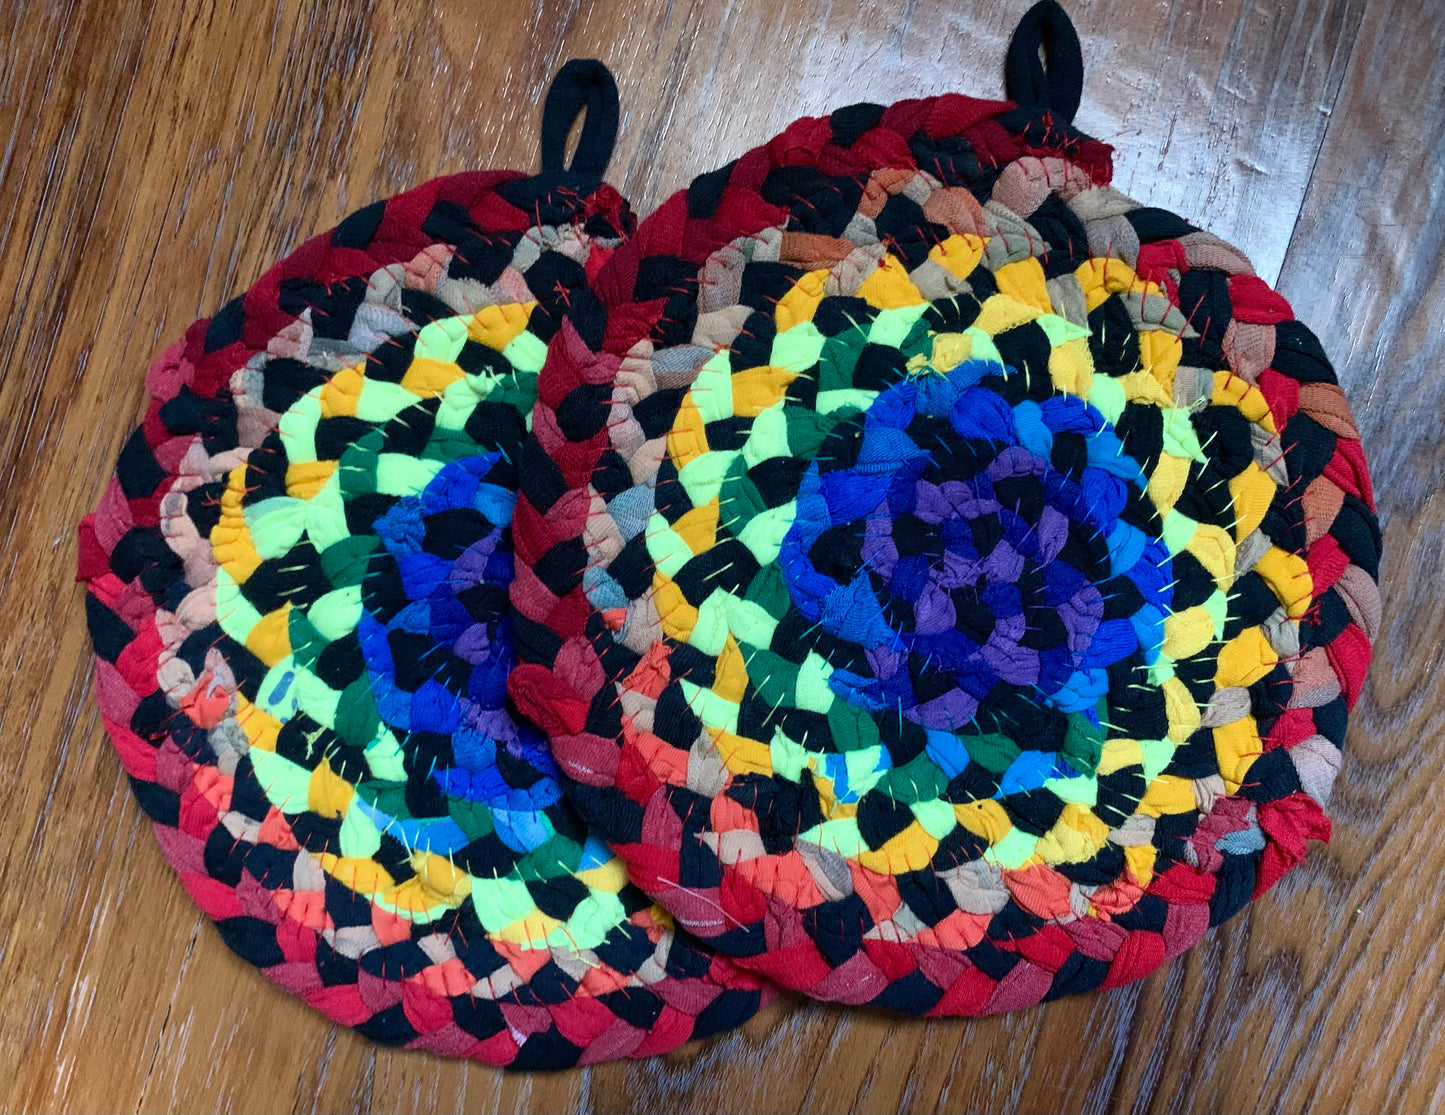 The back of two trivet potholders, to show off stitching, lay flat on a wood surface.